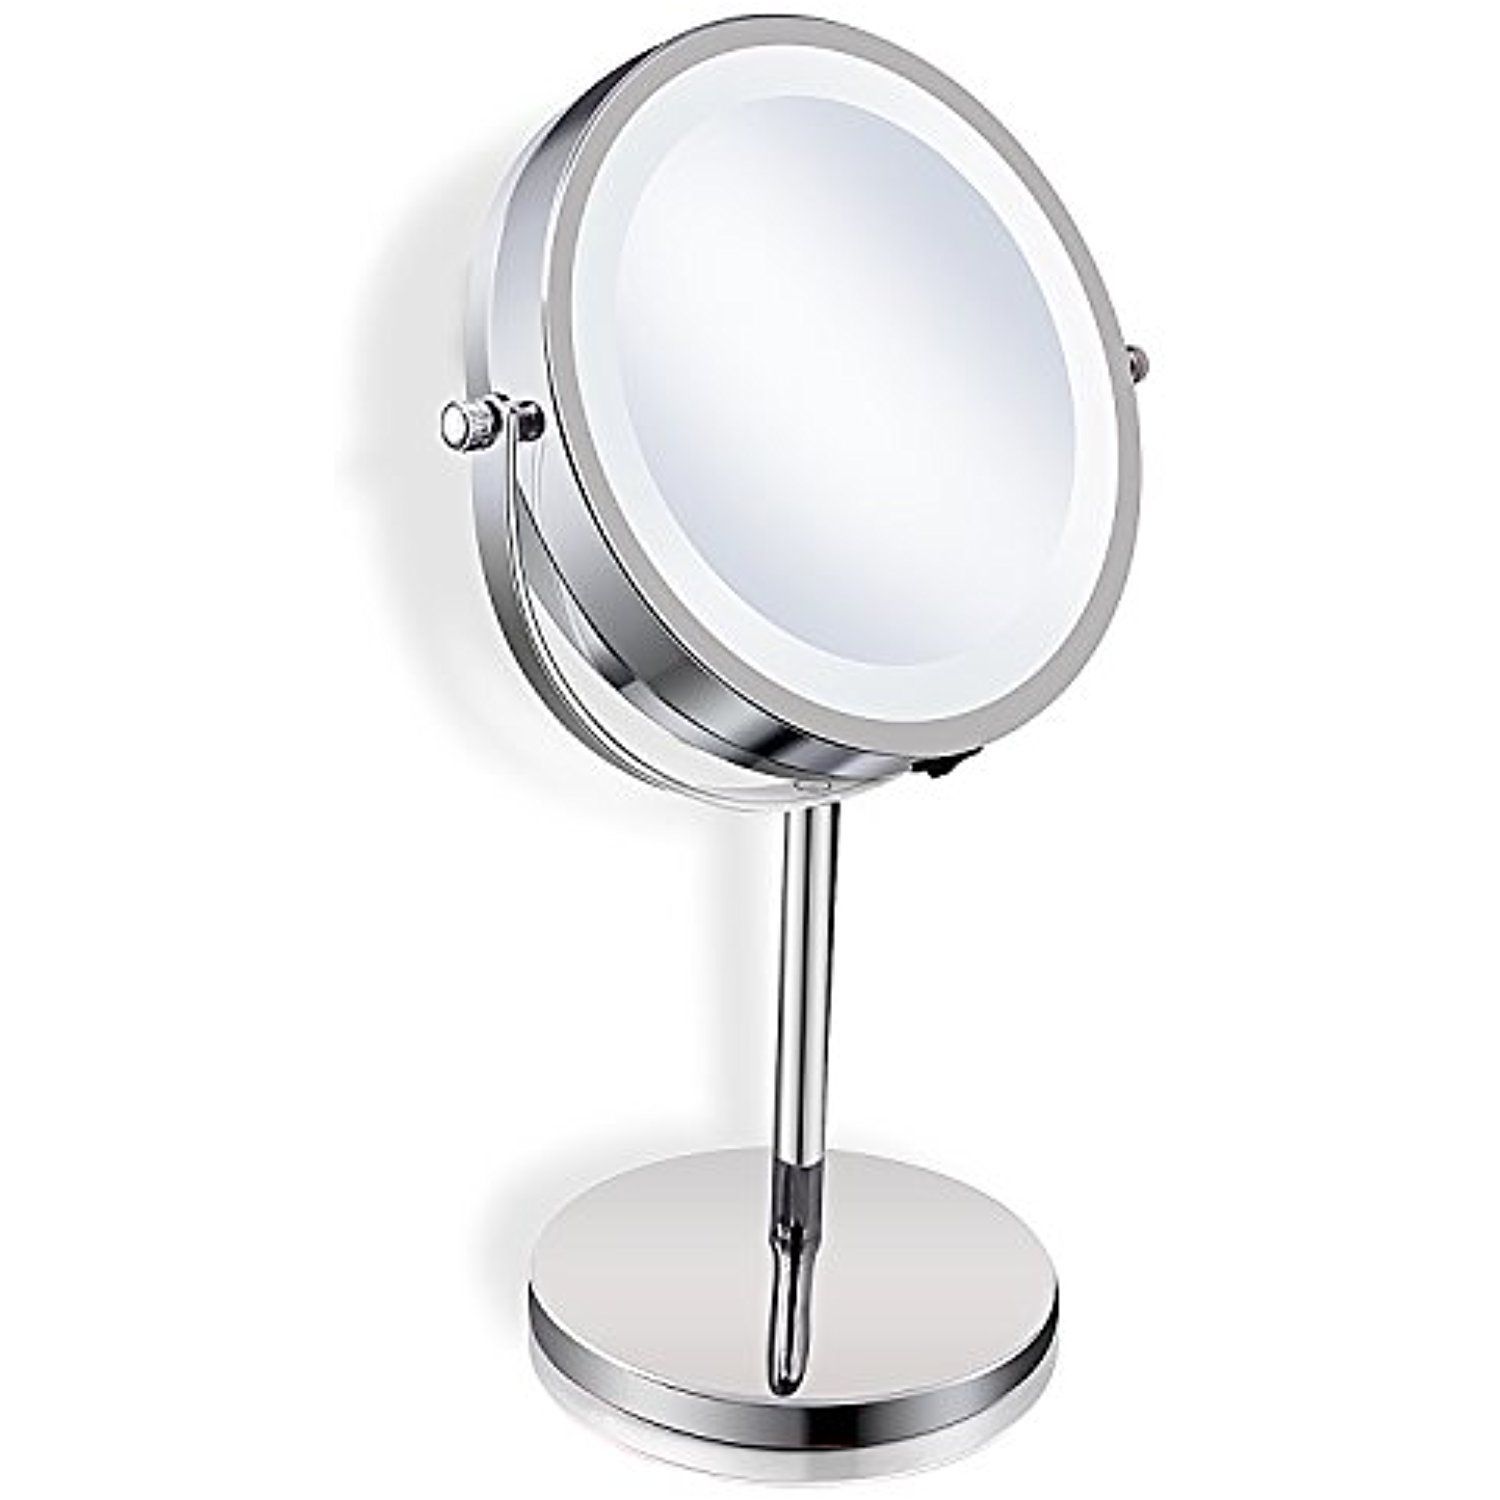 Makeup Mirror Led Light For Vanity Mirror,1x/3x Magnification Double Pertaining To Chrome Led Magnified Makeup Mirrors (View 2 of 15)